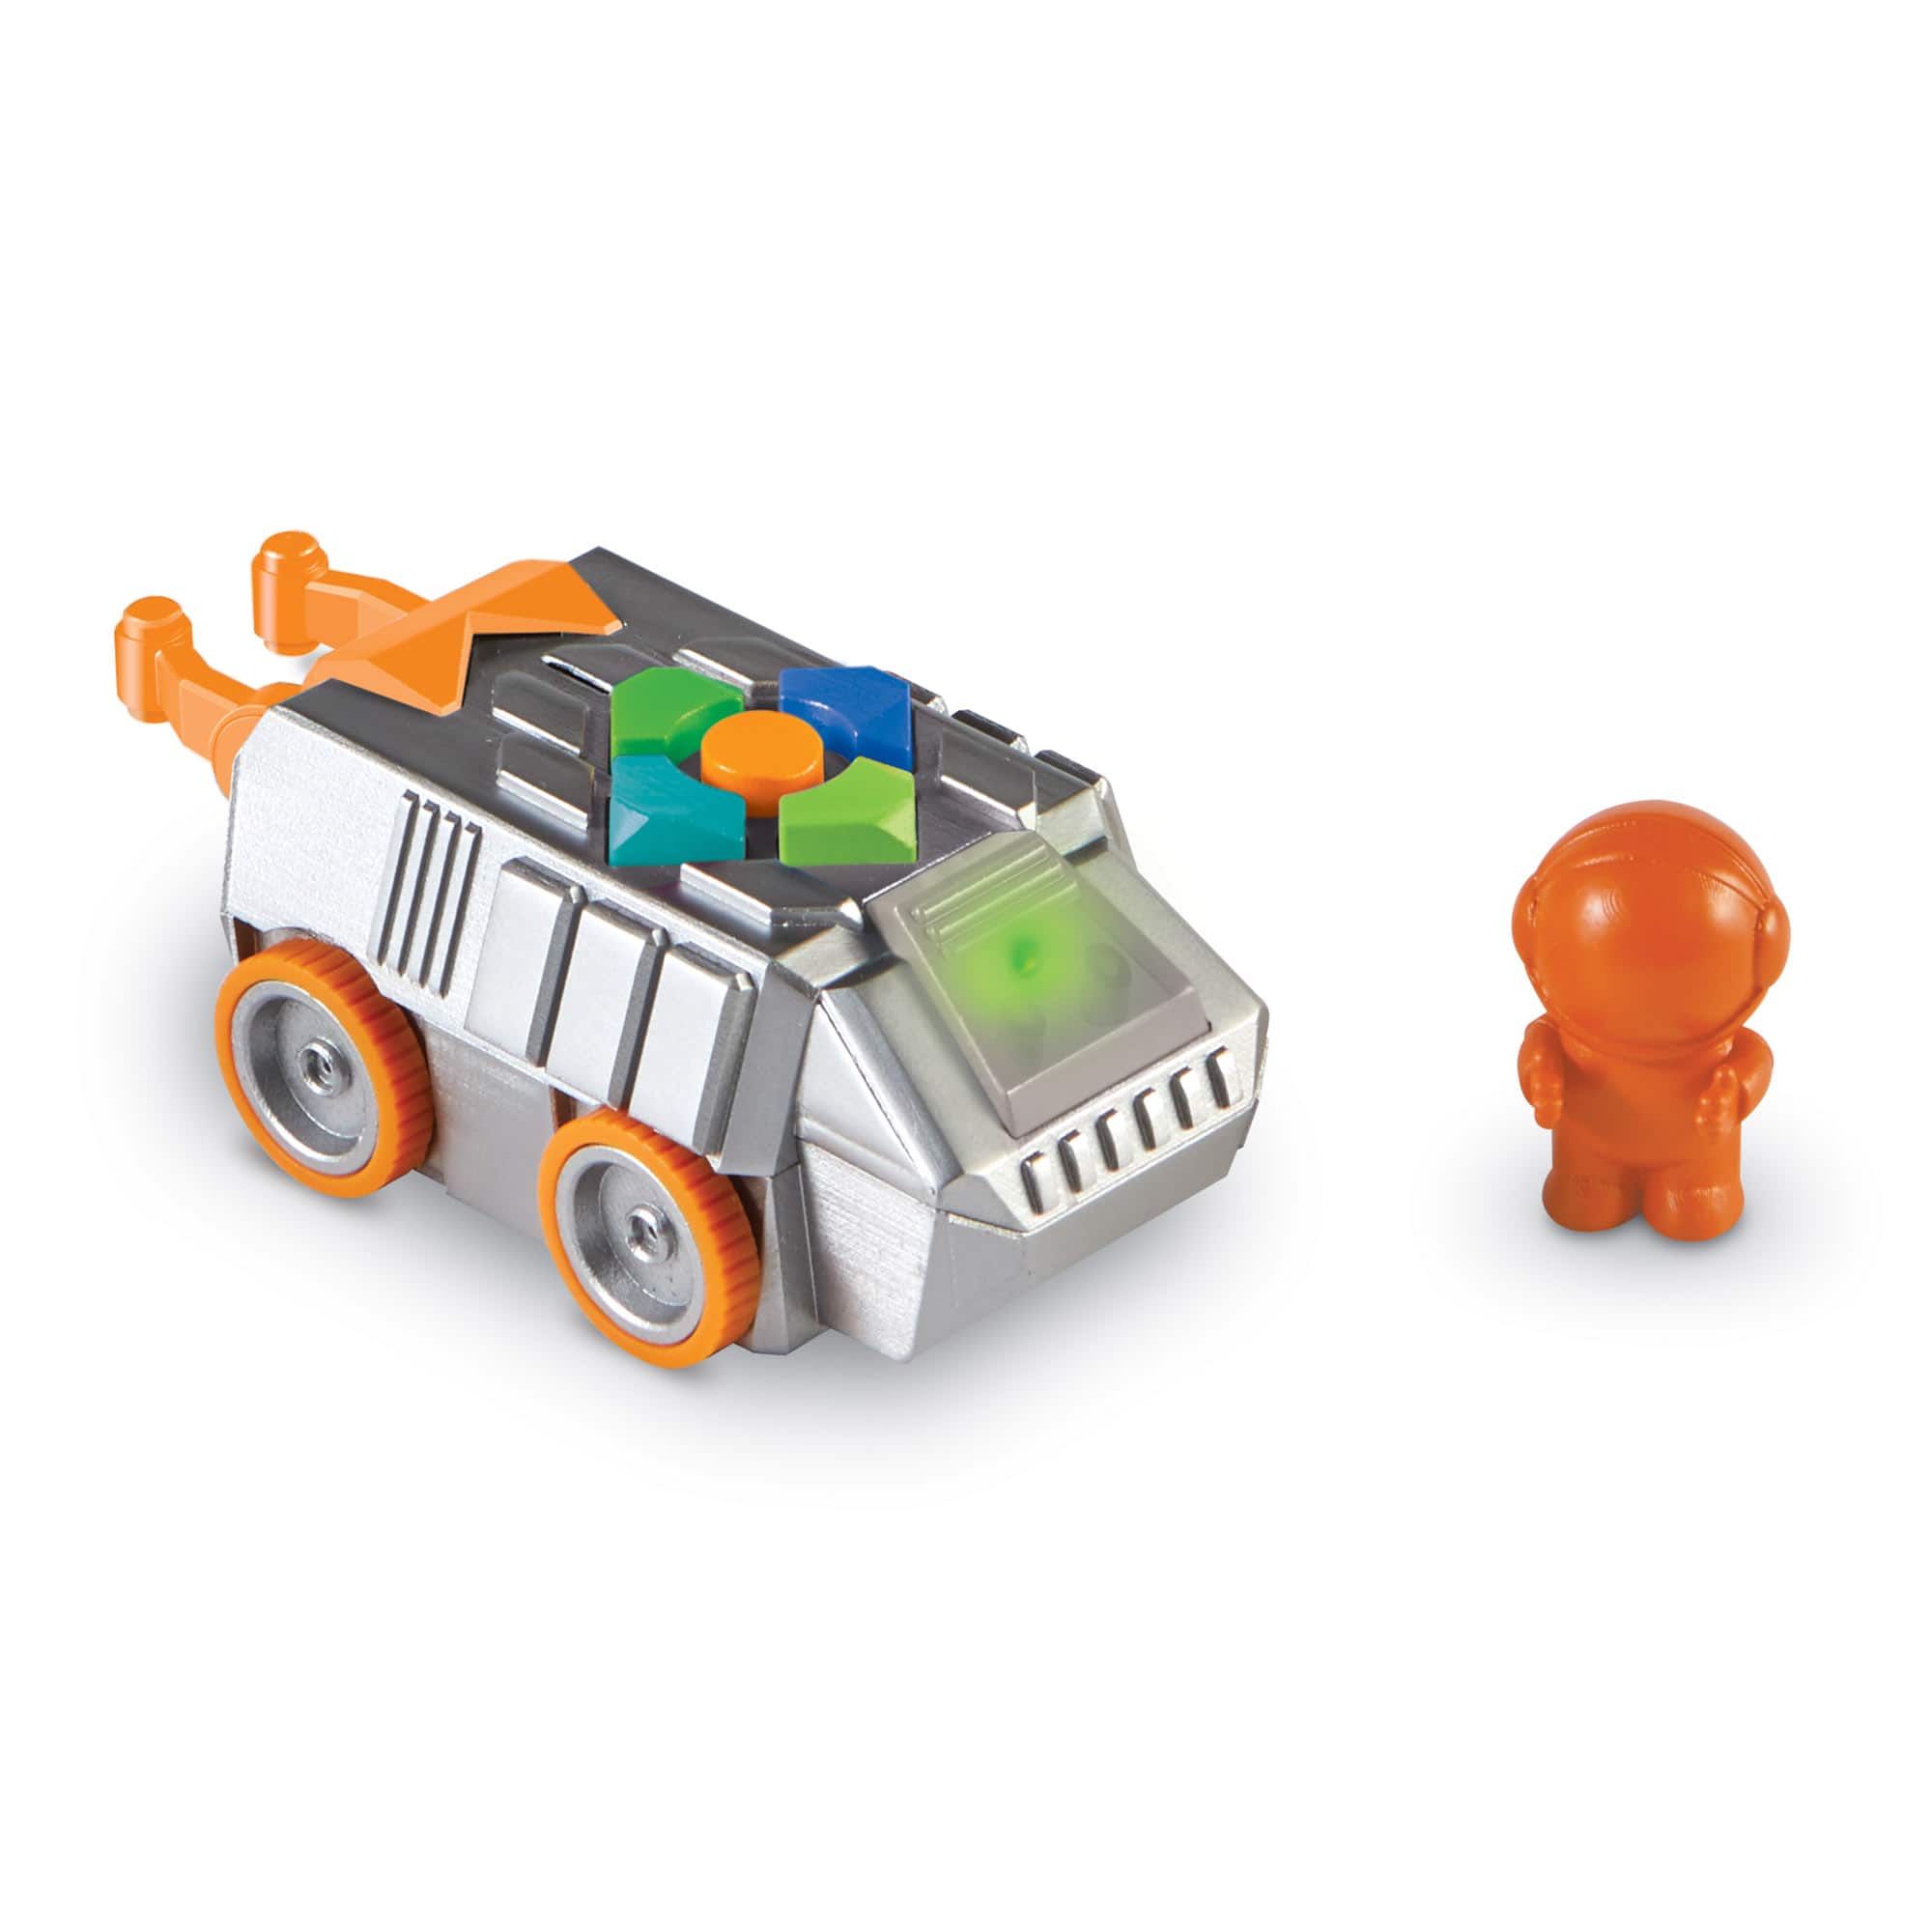 Learning Resources Space Rover Deluxe Set